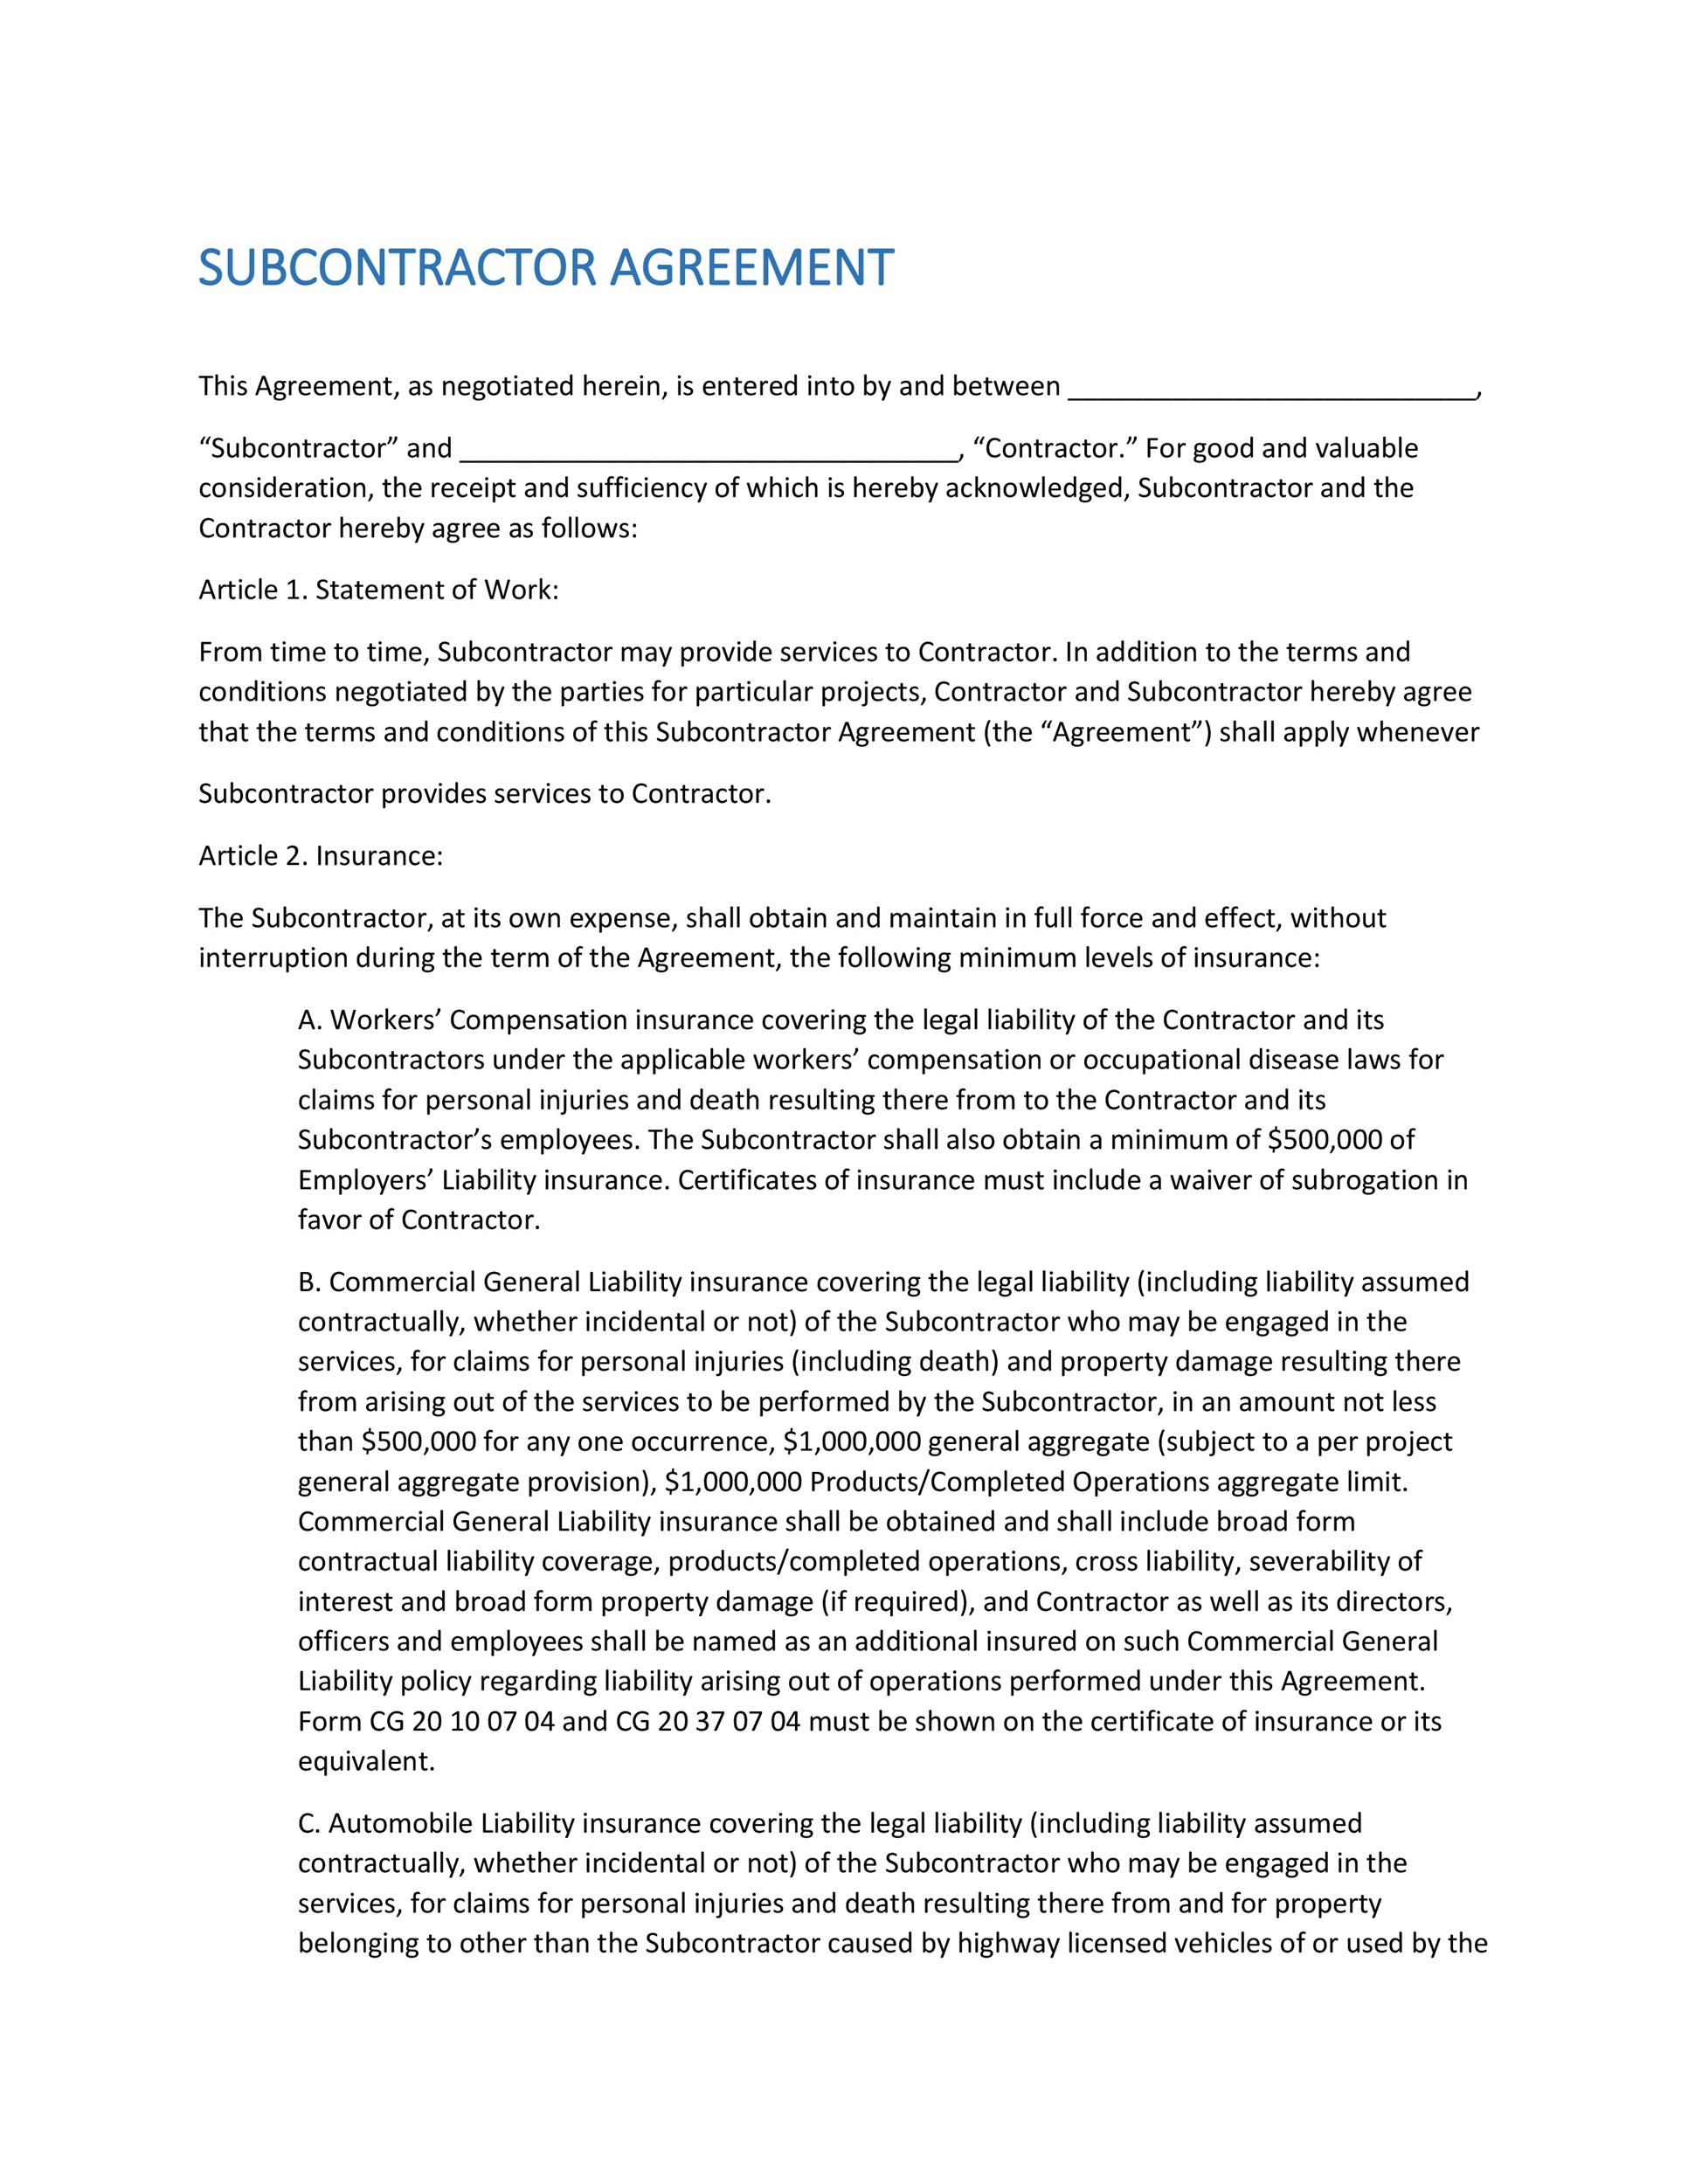 need-a-subcontractor-agreement-39-free-templates-here